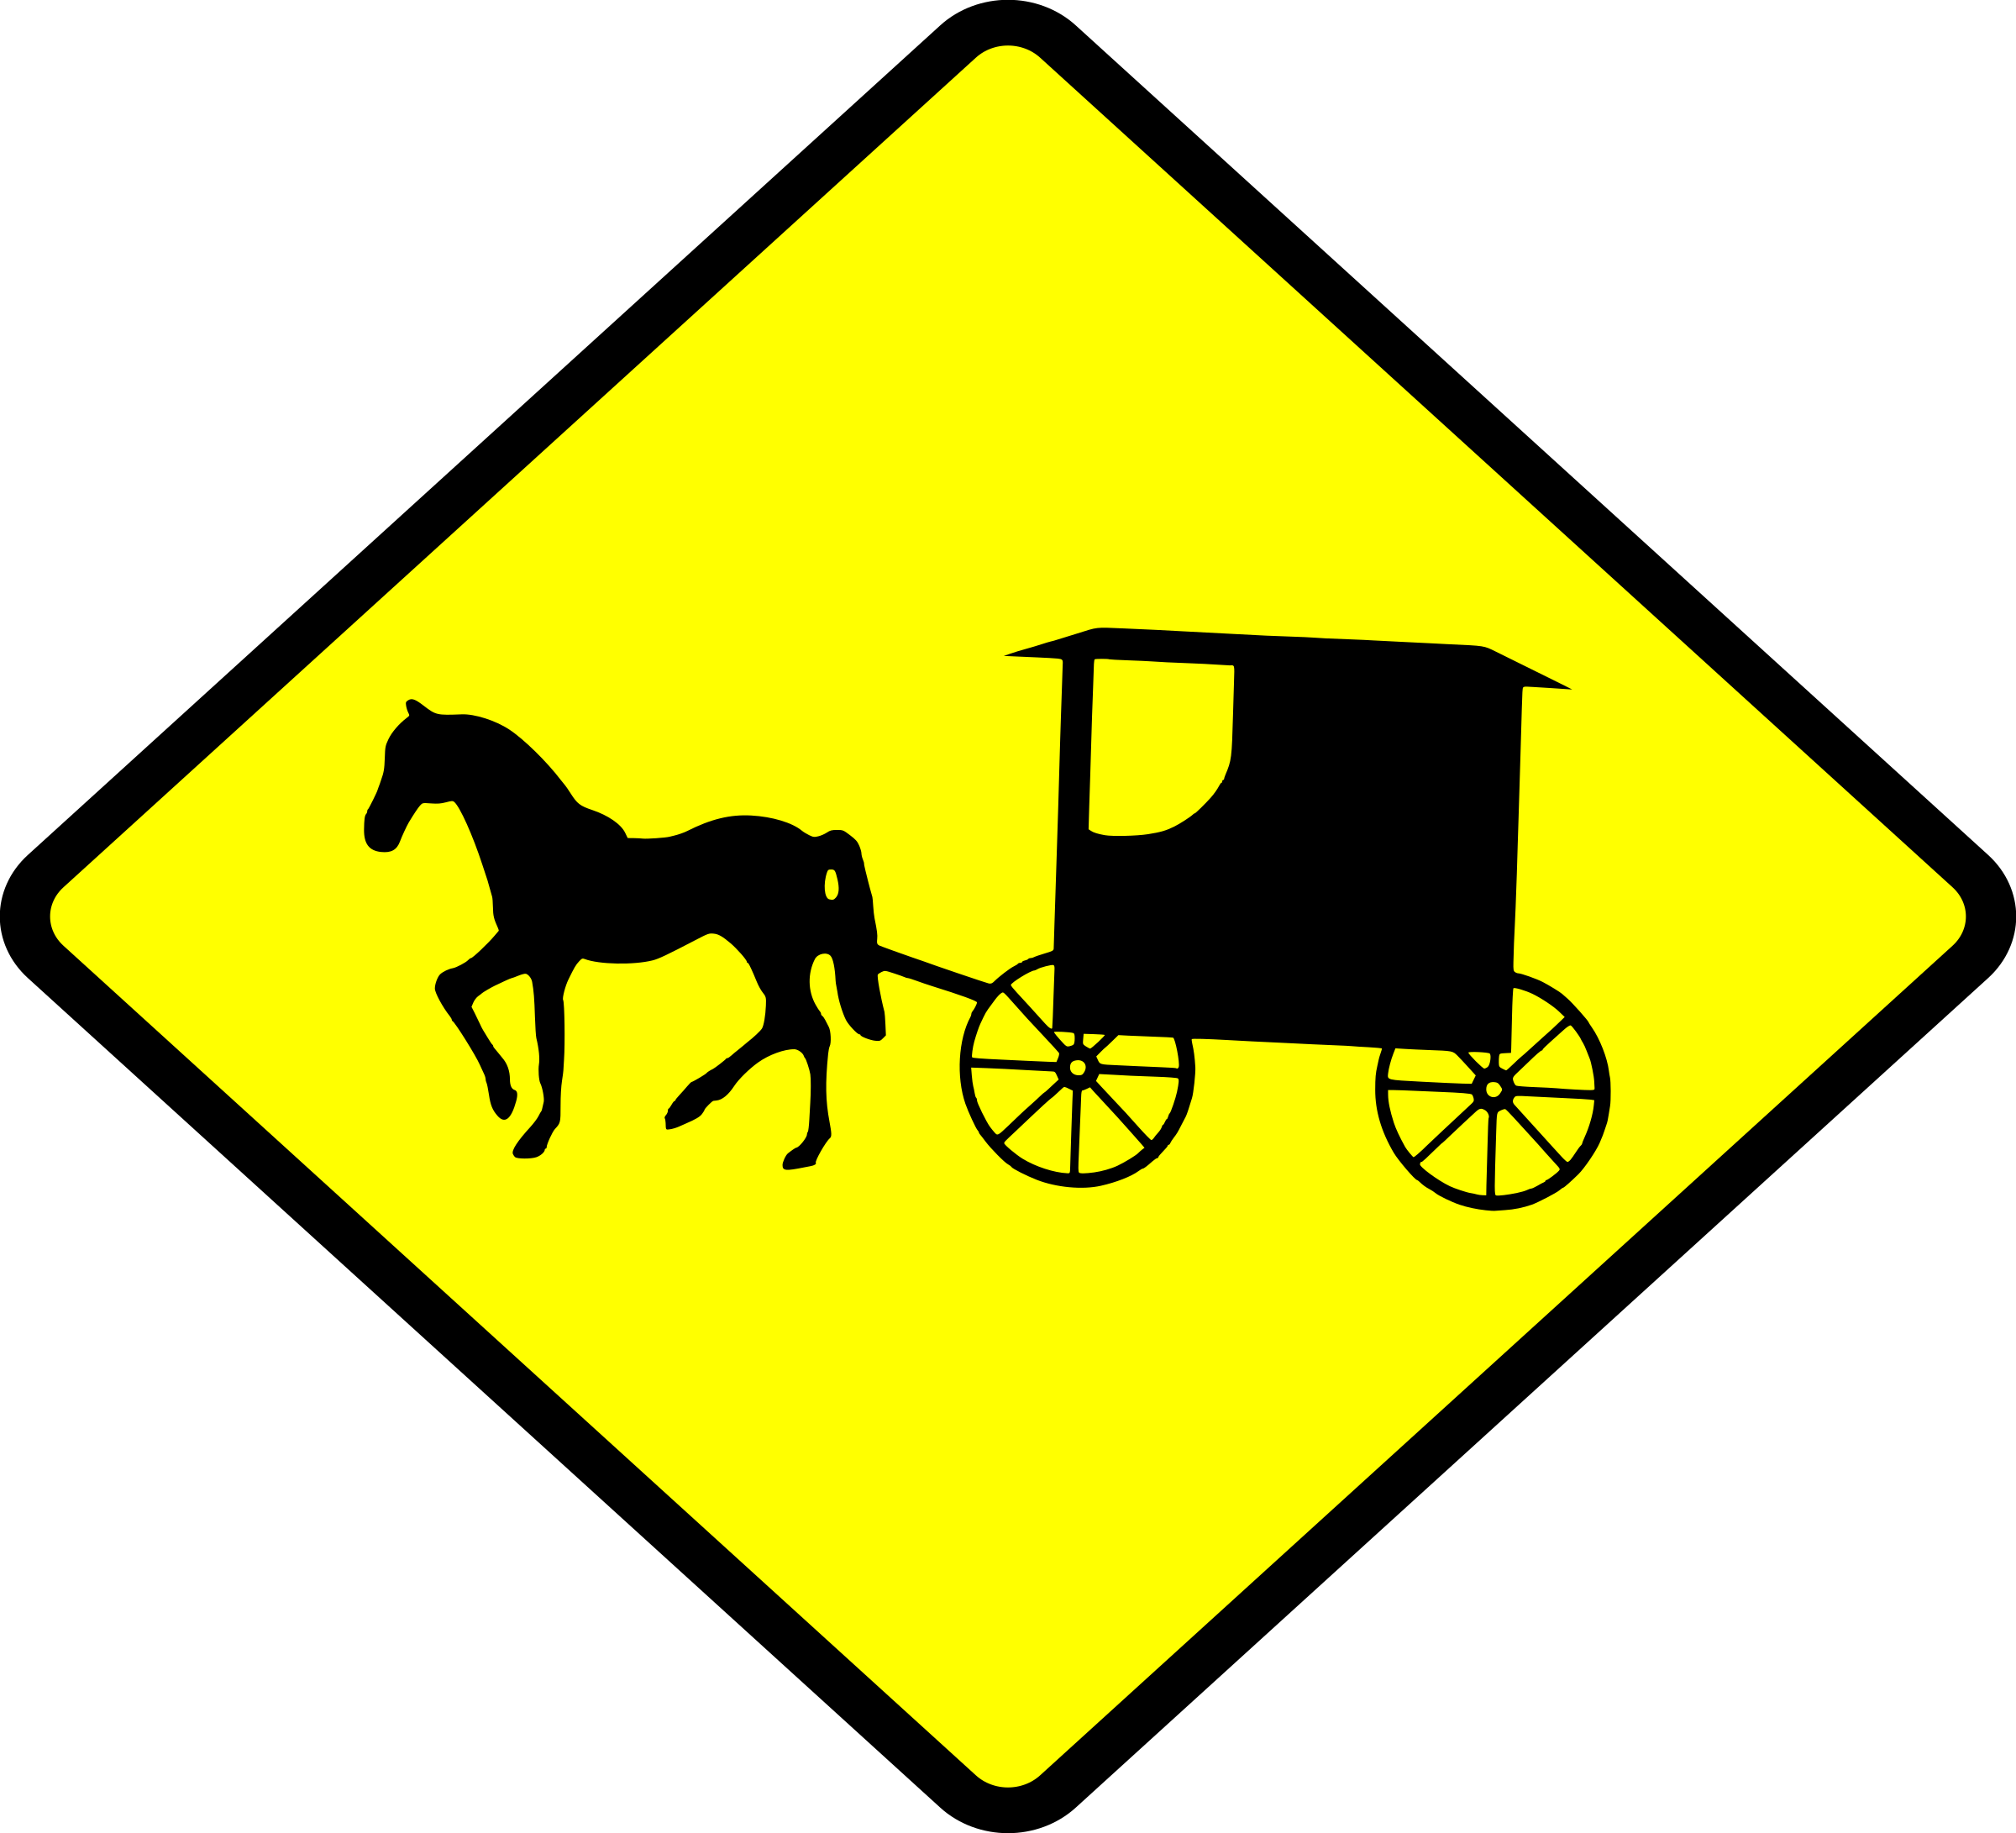 Amish Buggies - Slow Signs For Traffic (2400x2182)